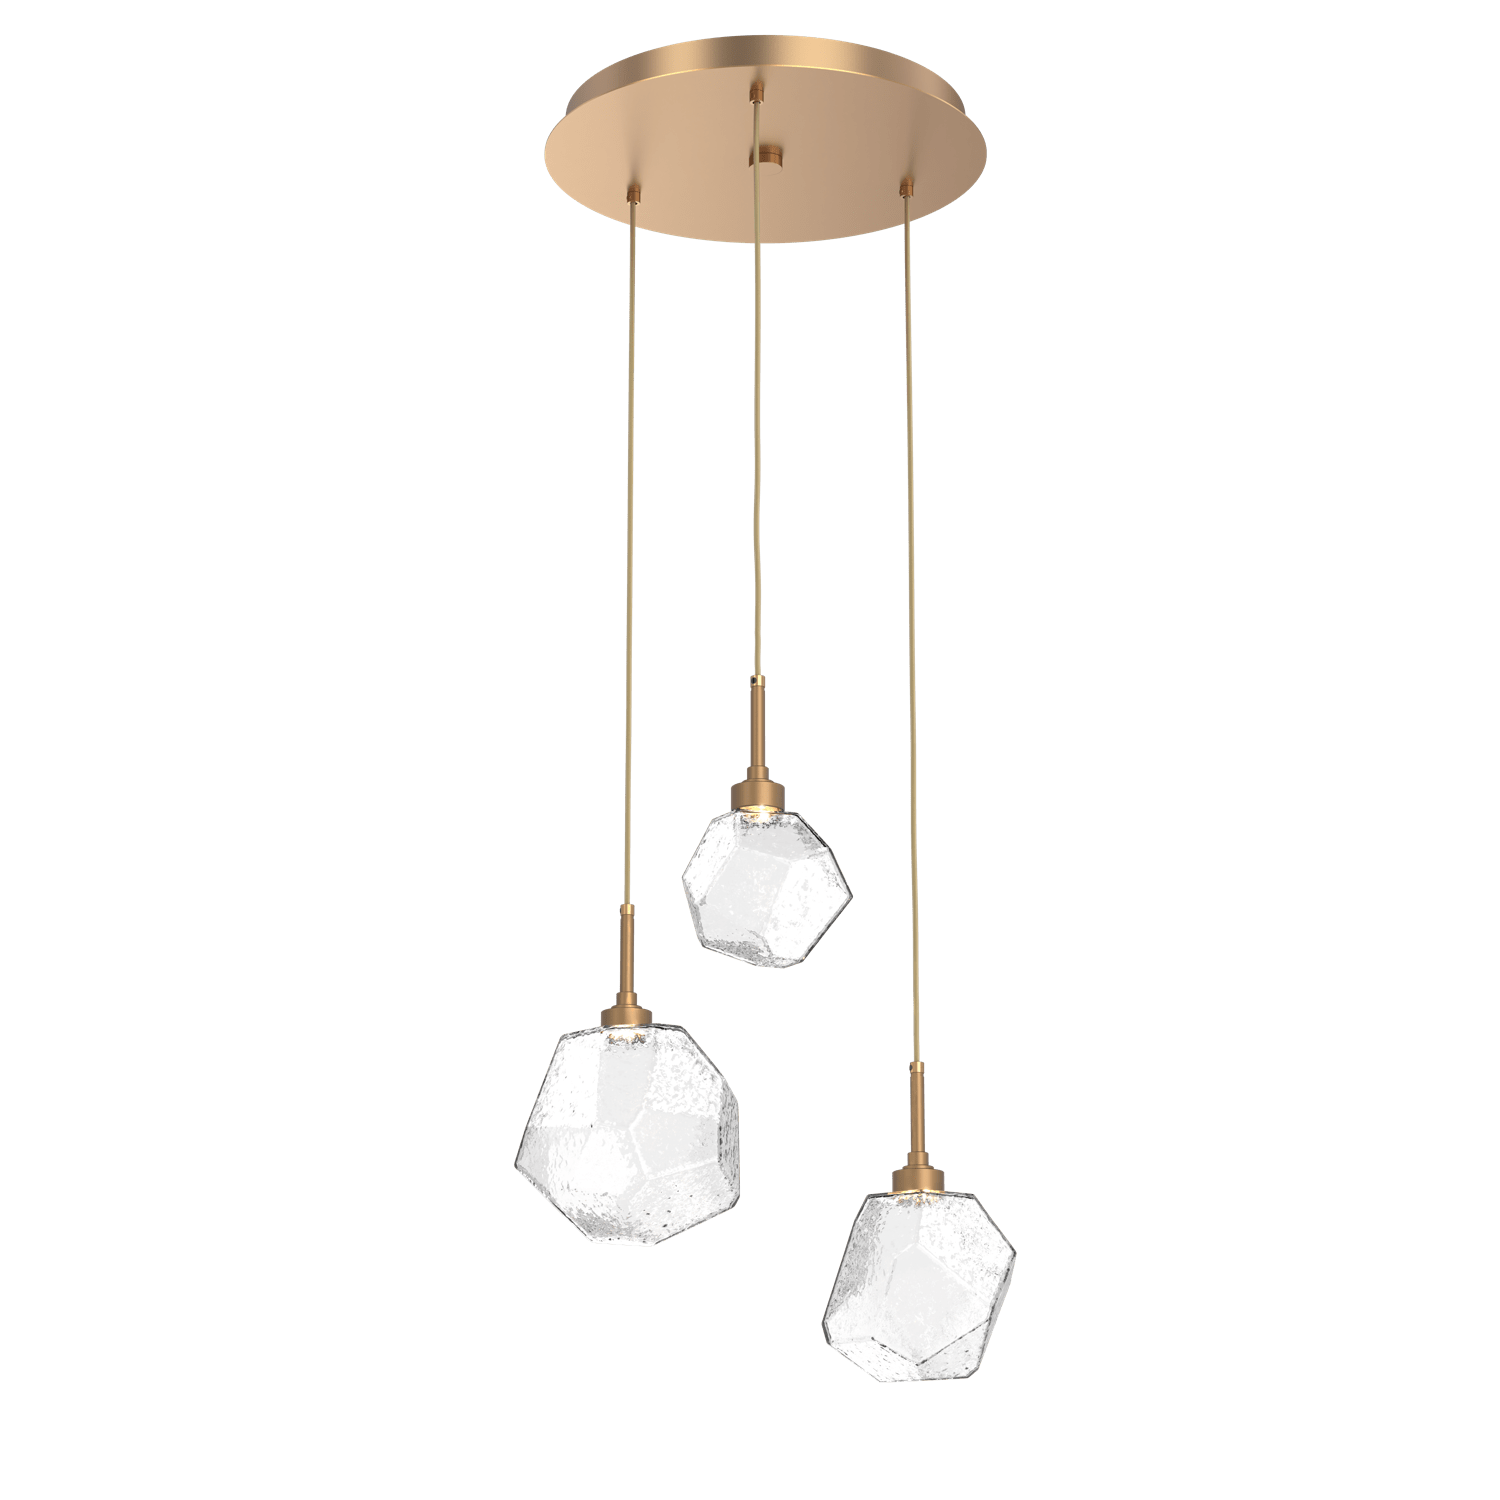 CHB0039-03-NB-C-Hammerton-Studio-Gem-3-light-round-pendant-chandelier-with-novel-brass-finish-and-clear-blown-glass-shades-and-LED-lamping